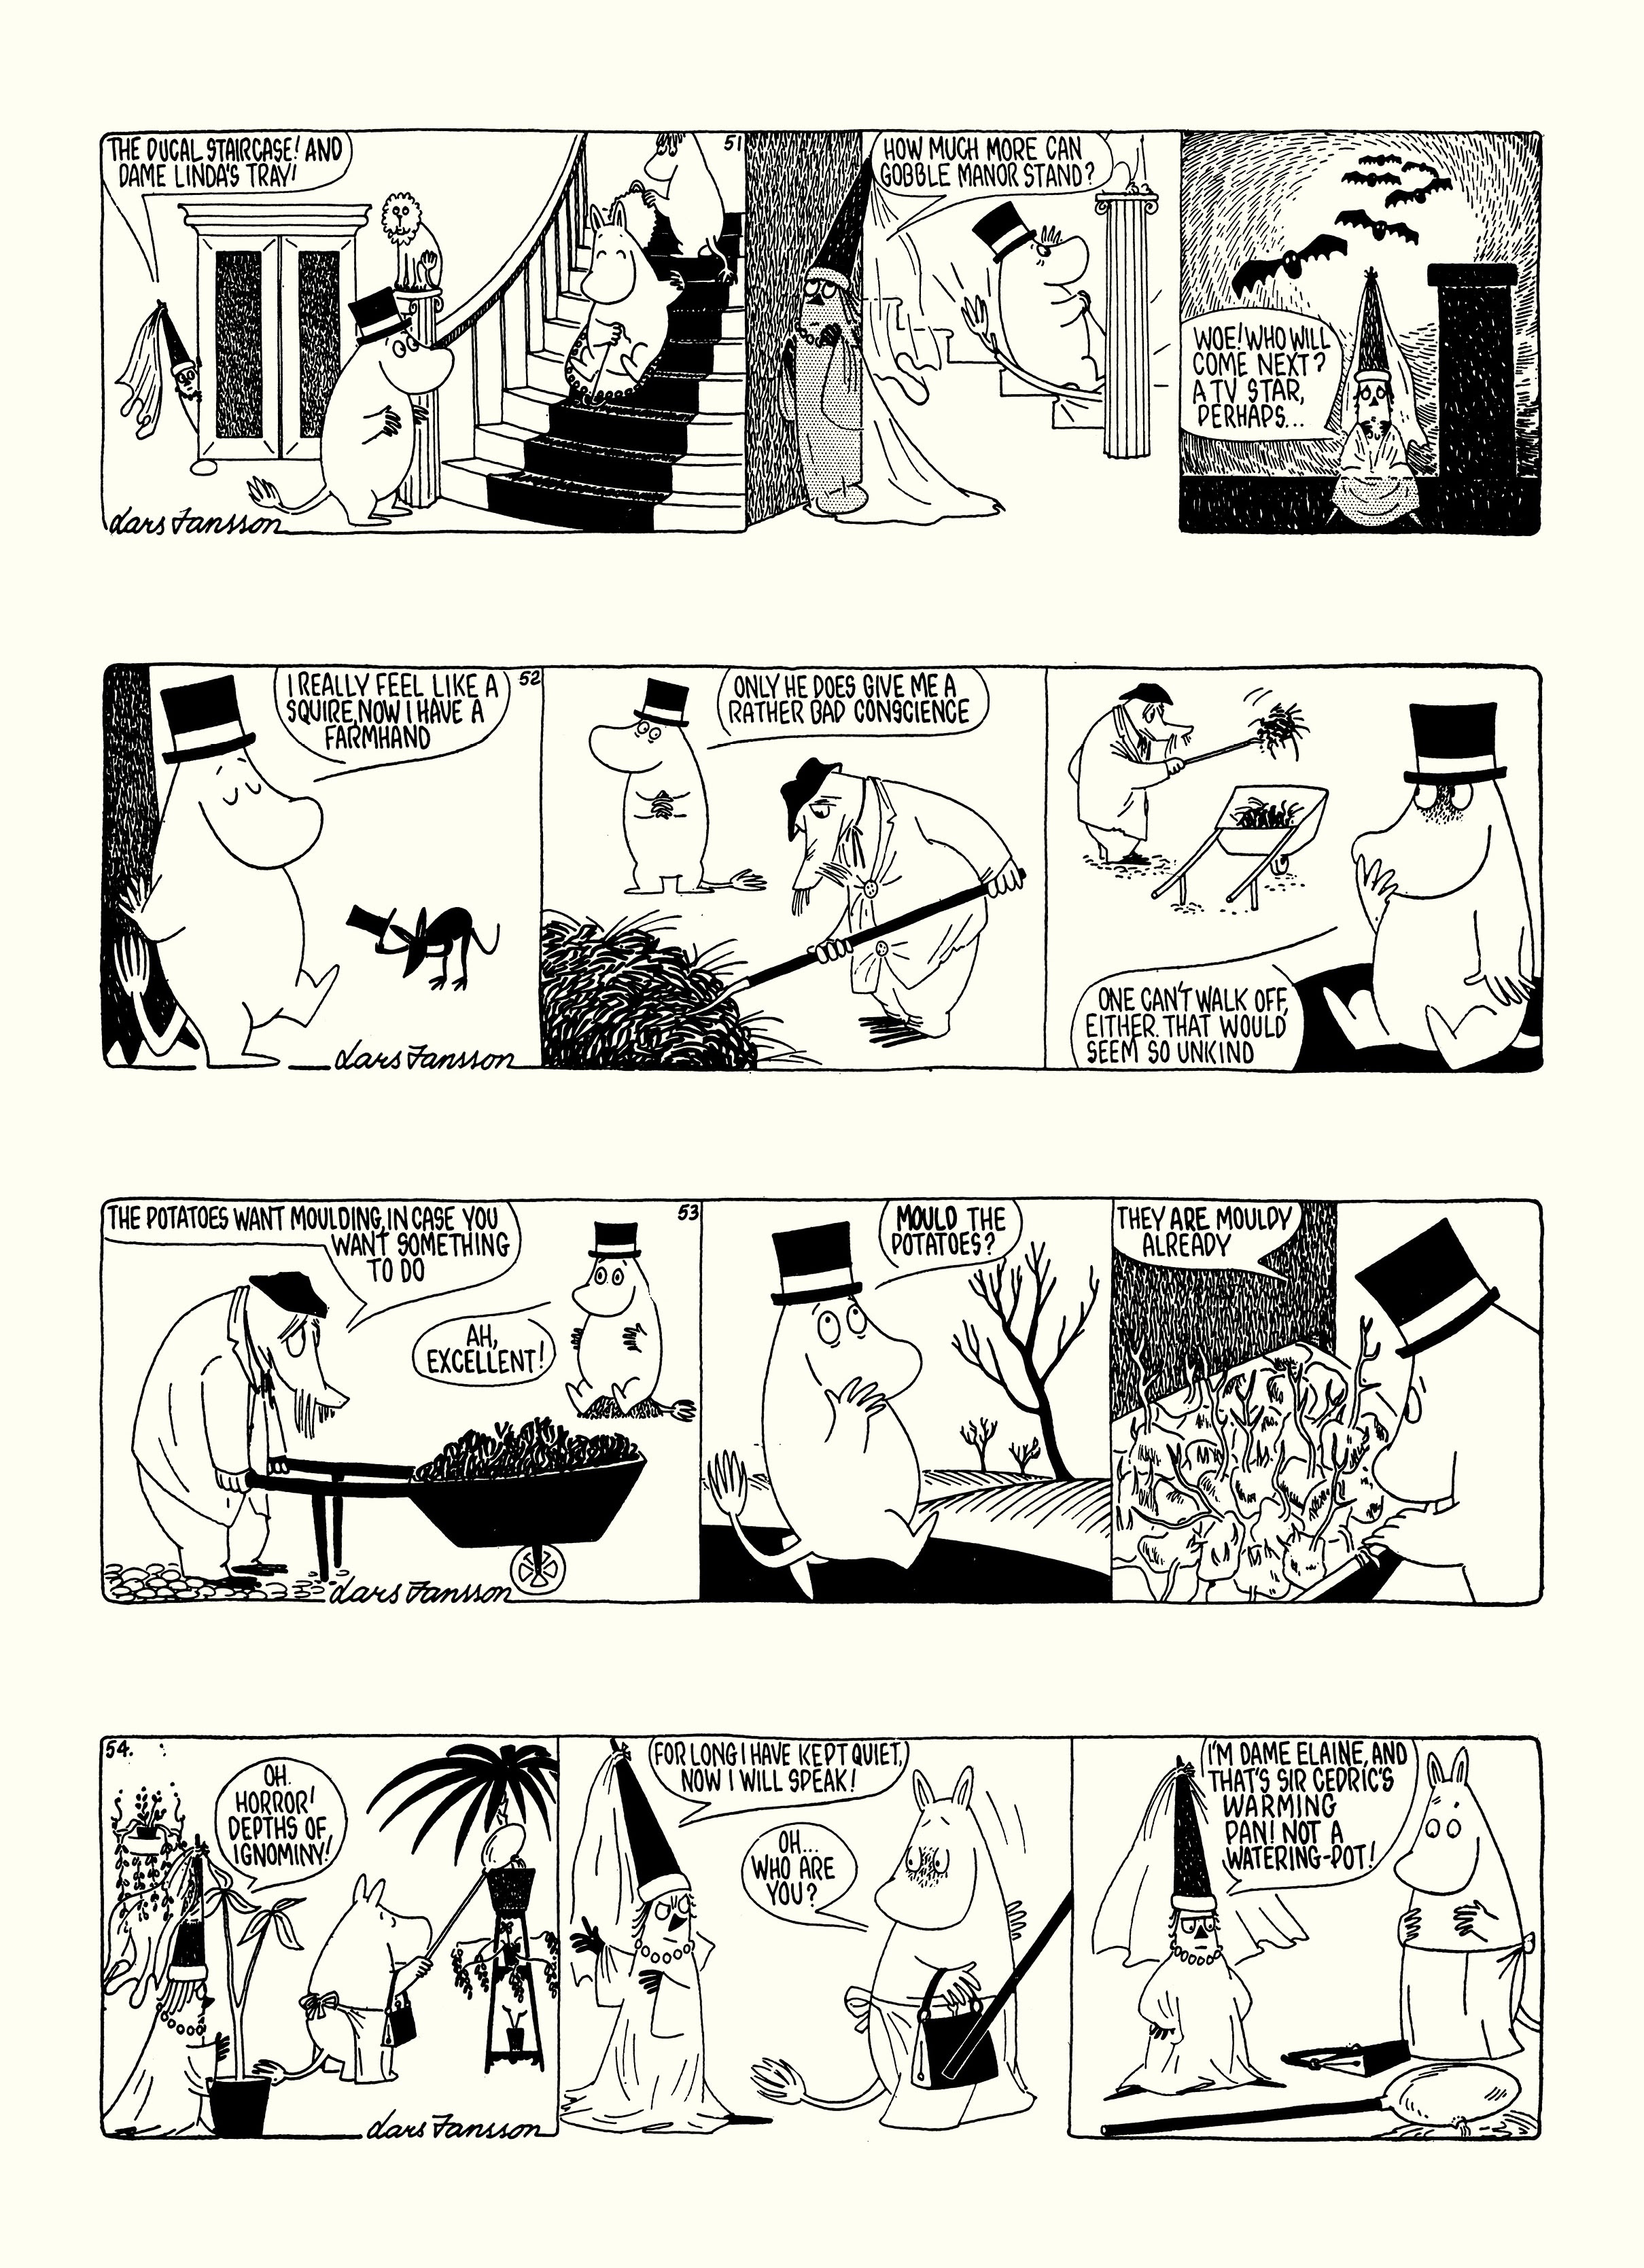 Read online Moomin: The Complete Lars Jansson Comic Strip comic -  Issue # TPB 7 - 61